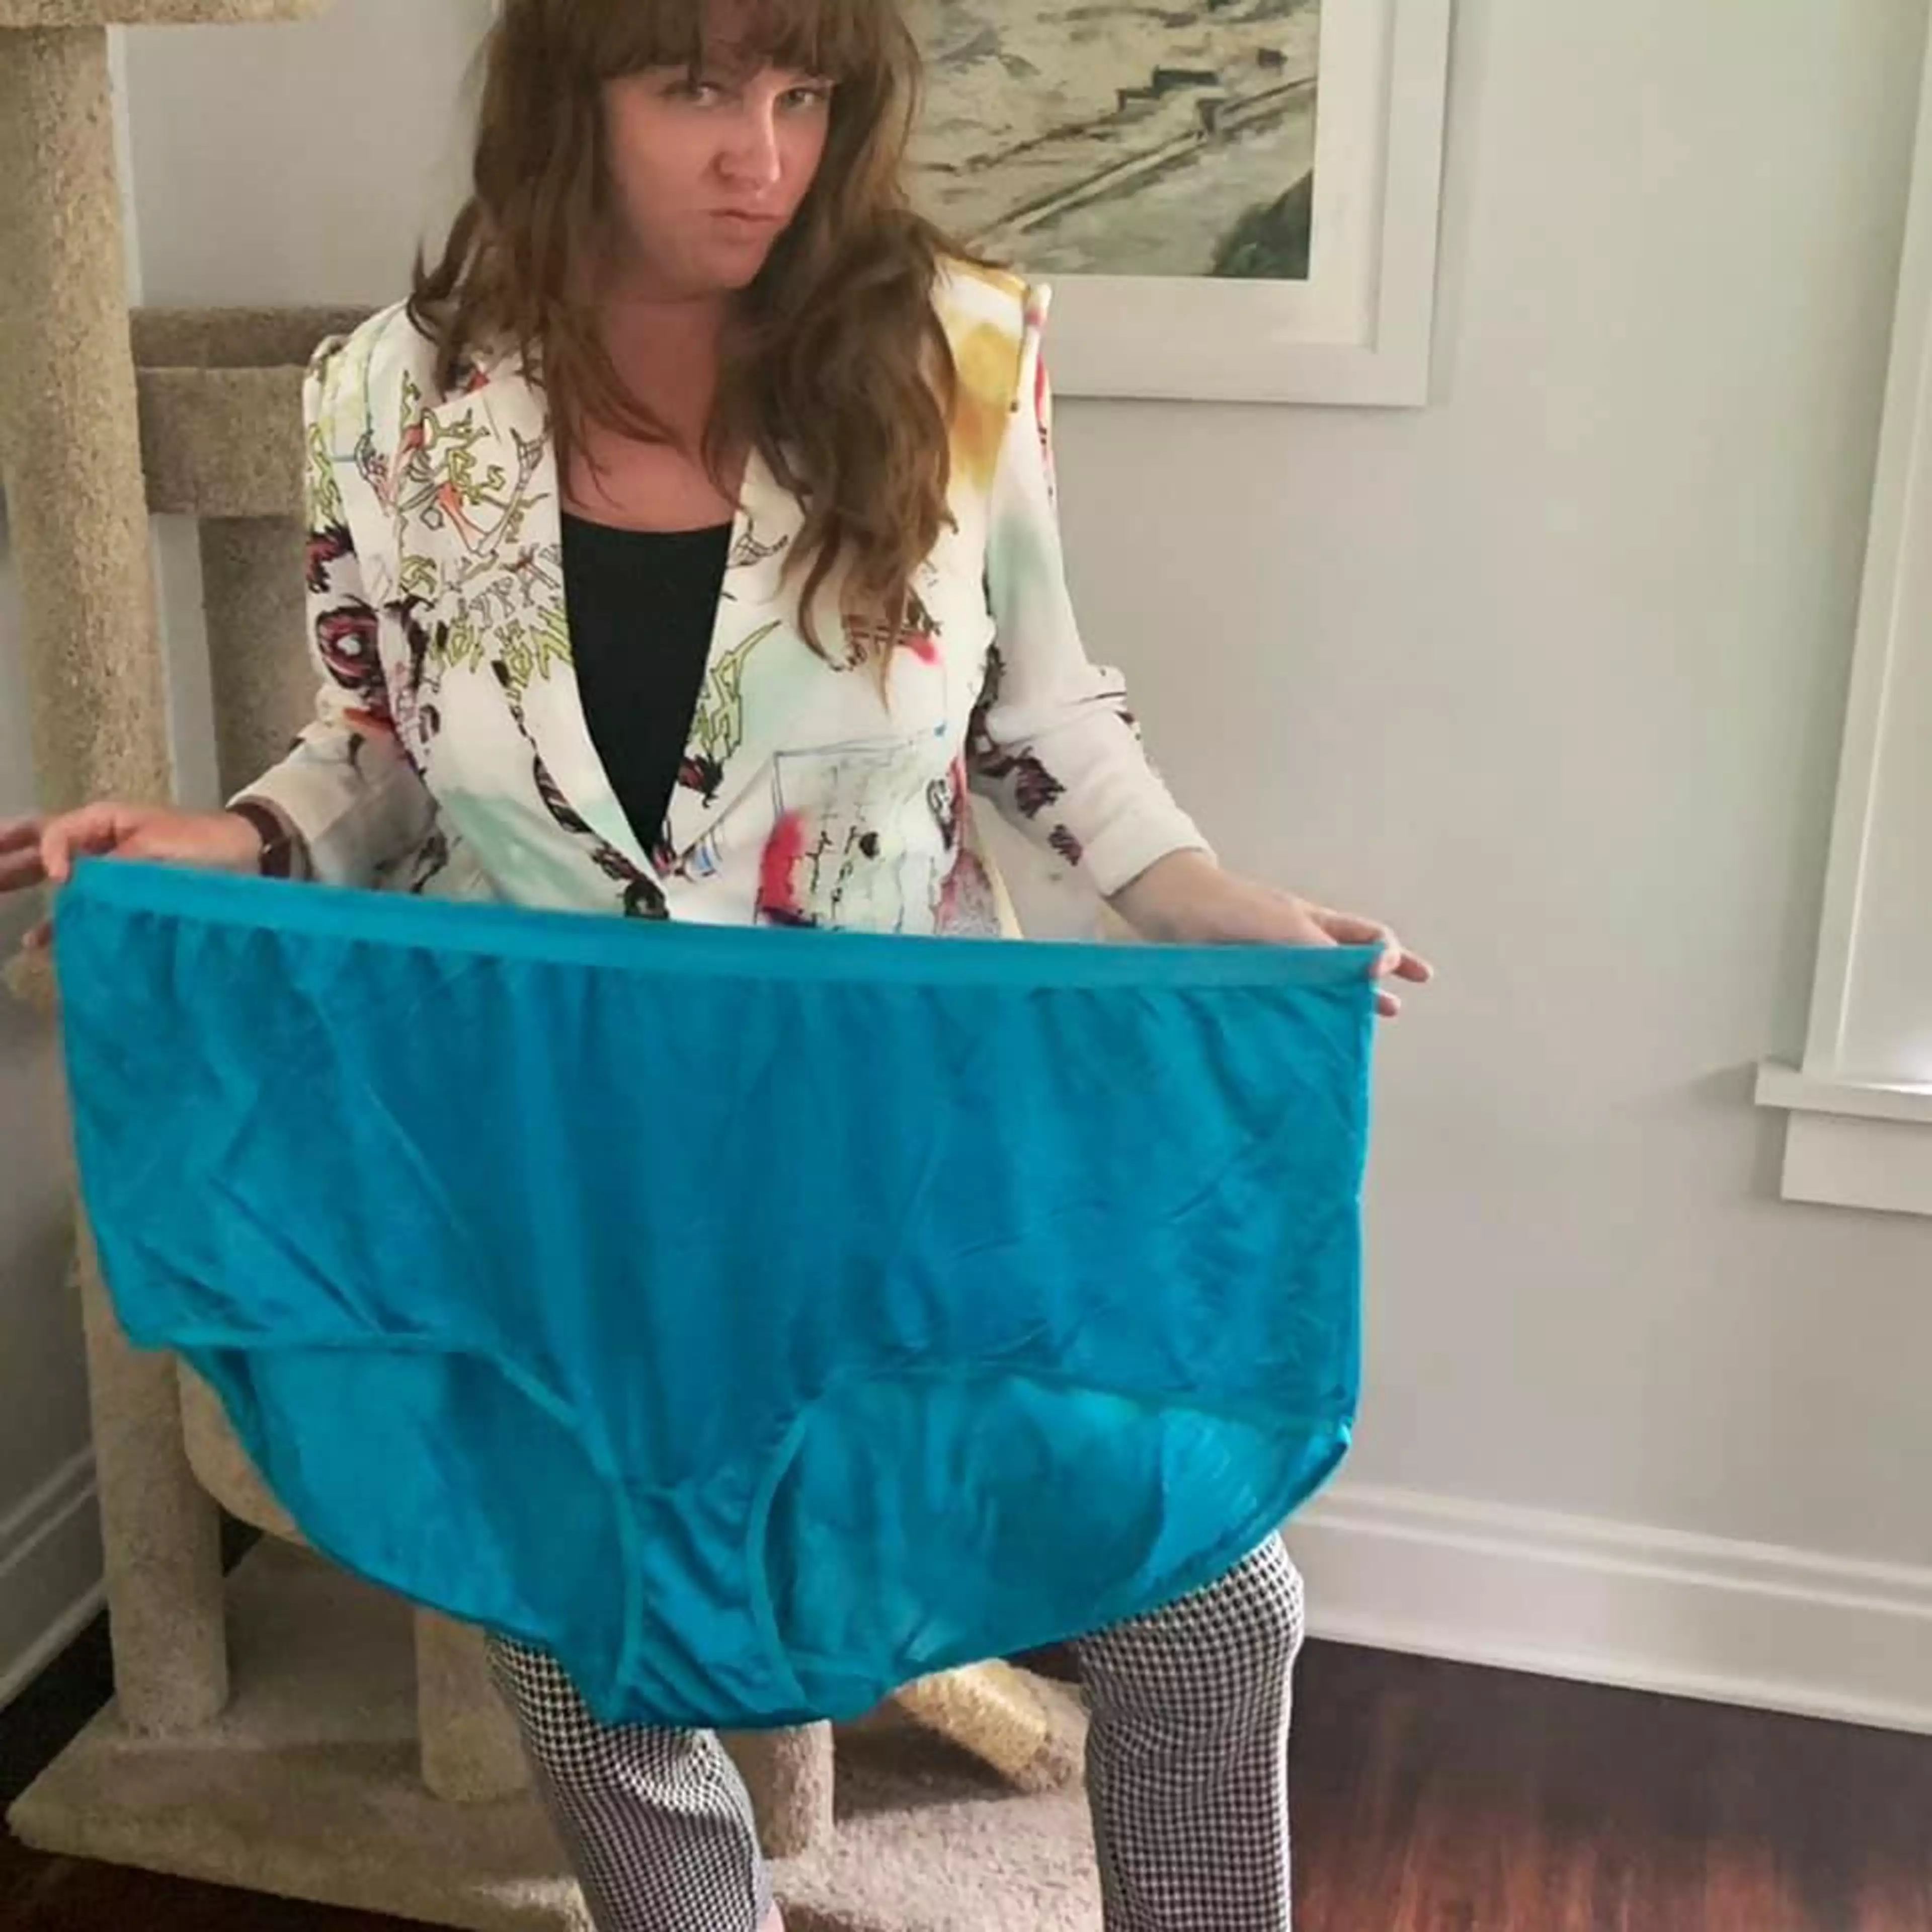 It's safe to say the knickers were bigger than expected (